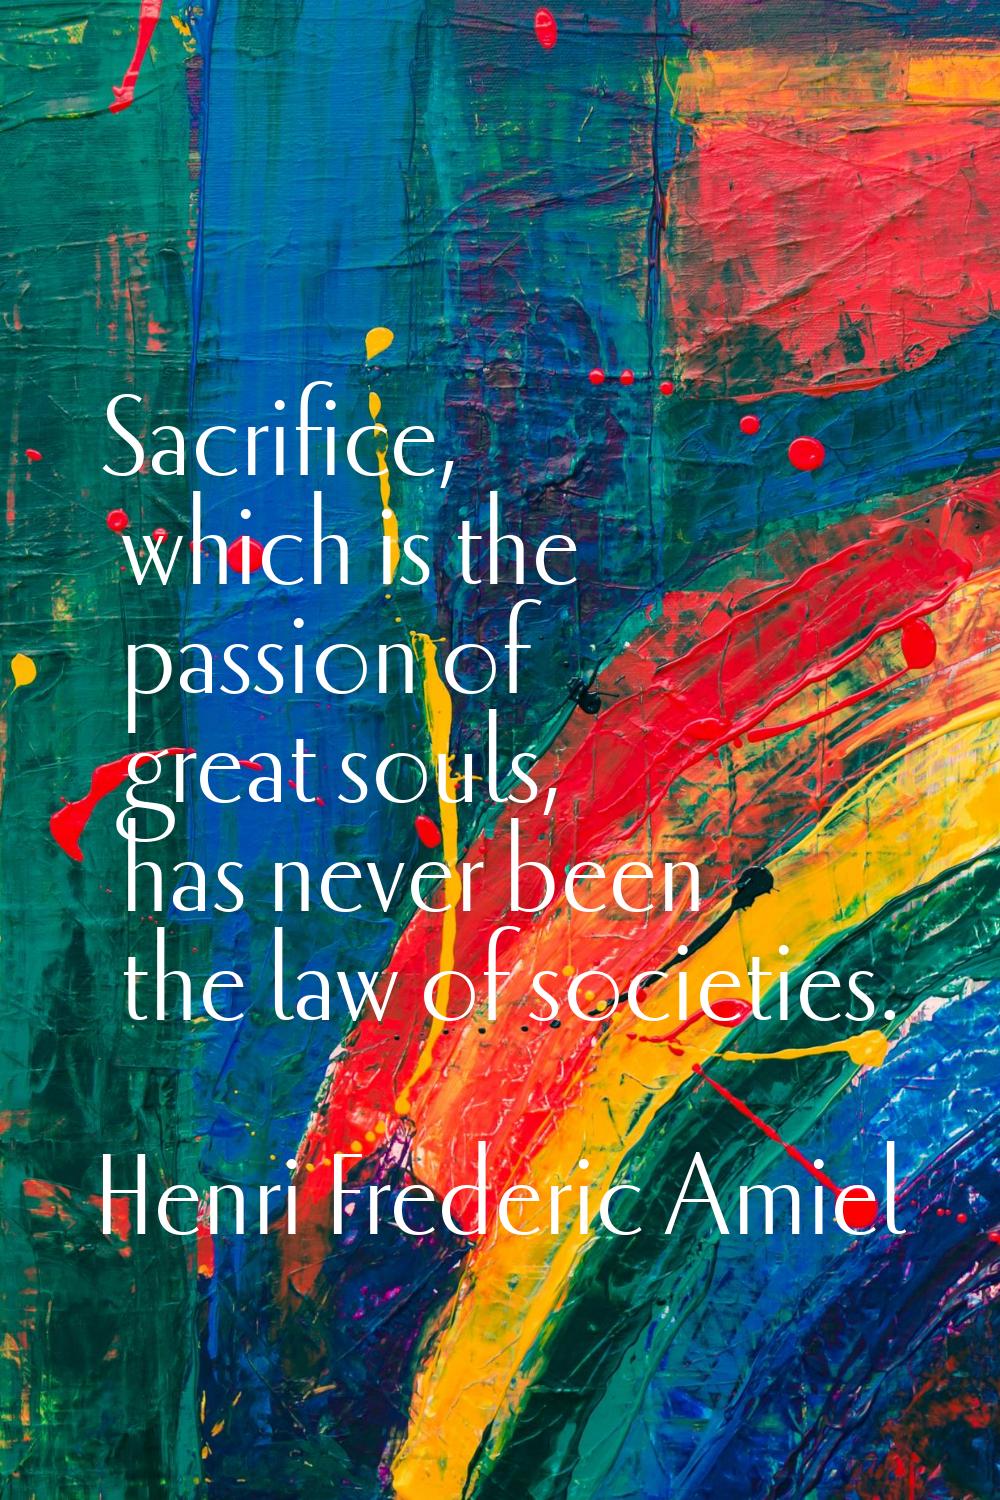 Sacrifice, which is the passion of great souls, has never been the law of societies.